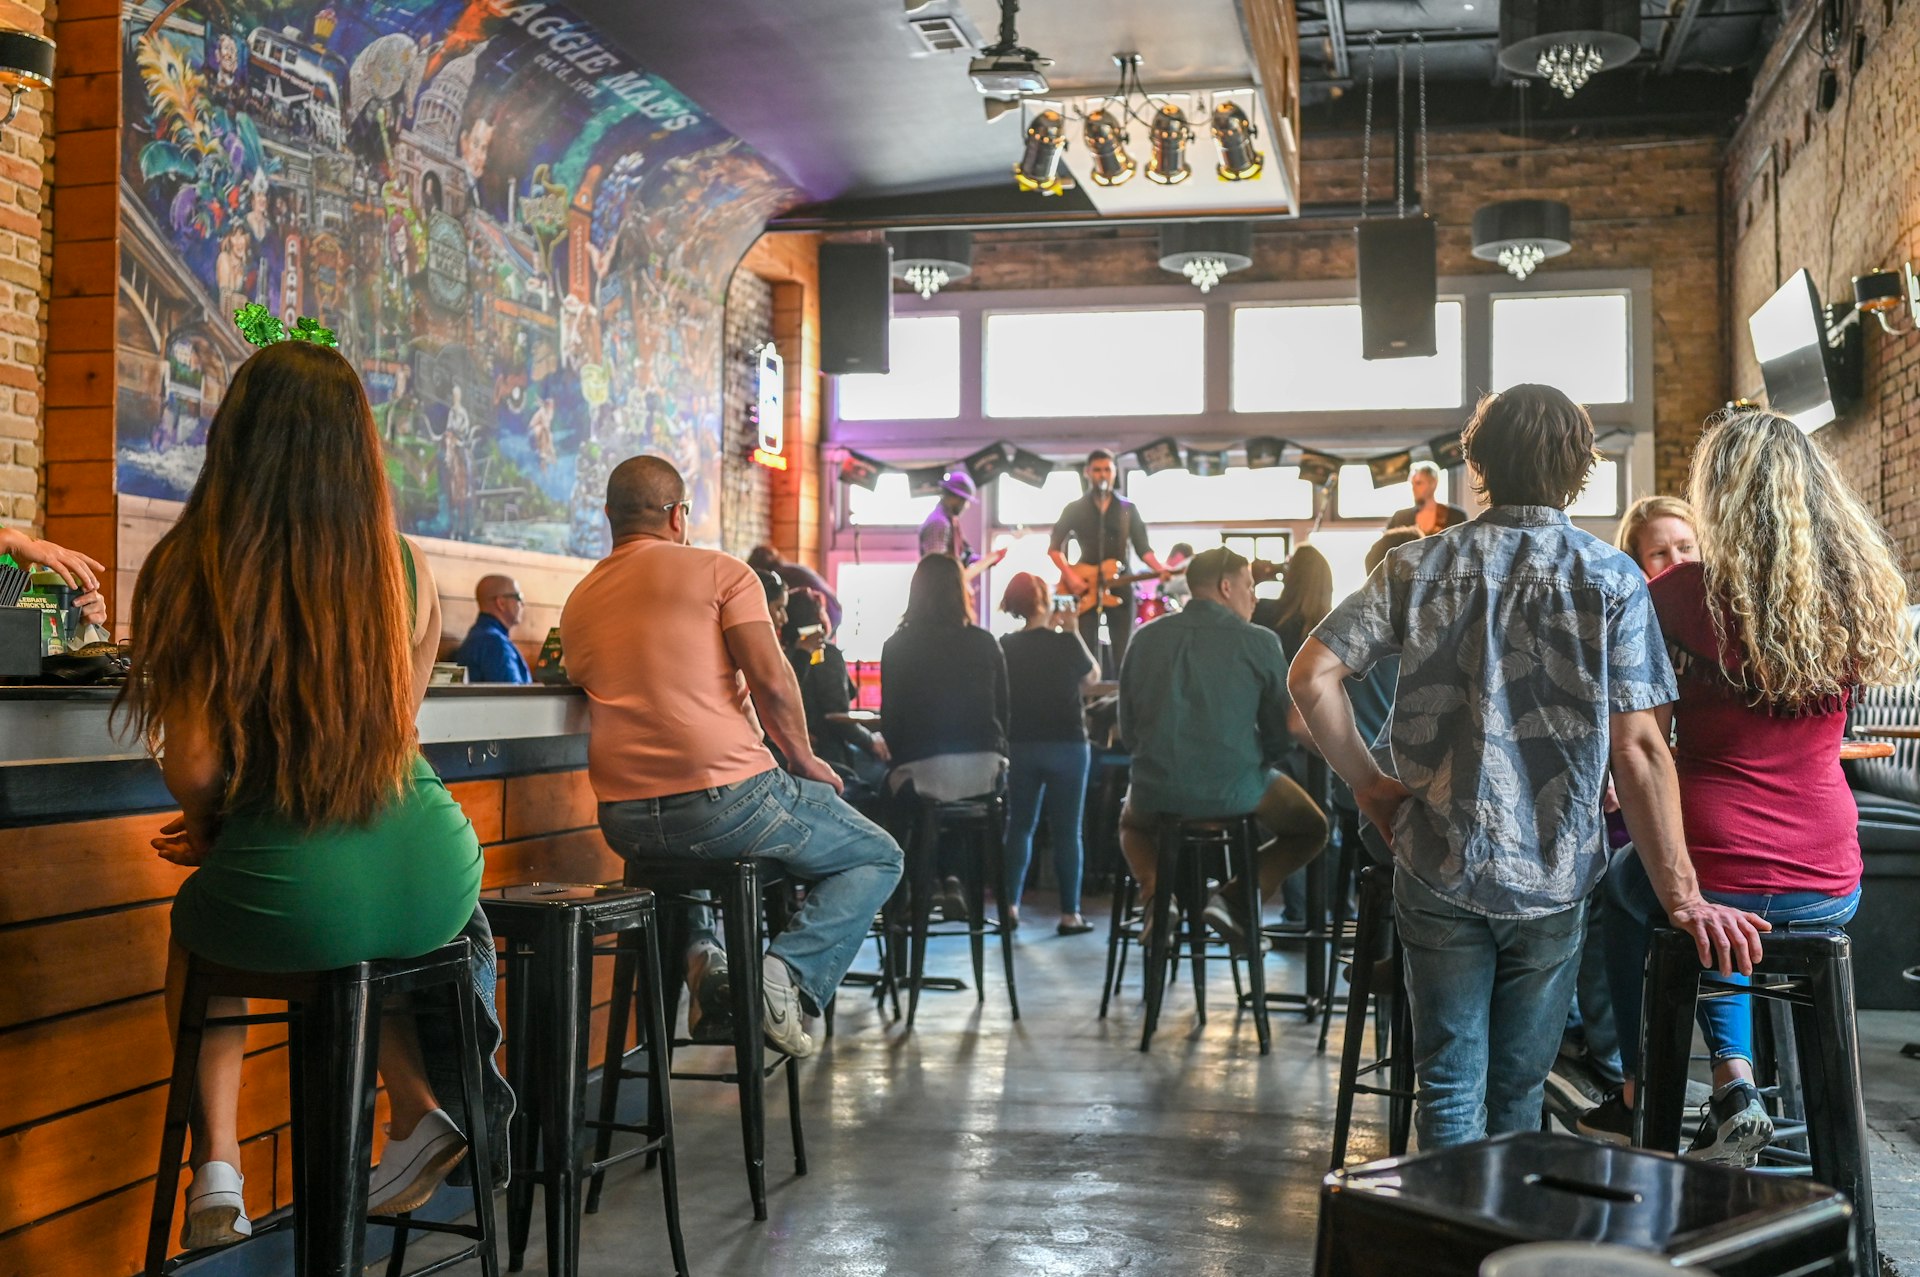 Customers sat facing a band playing in a bar in Austin, Texas